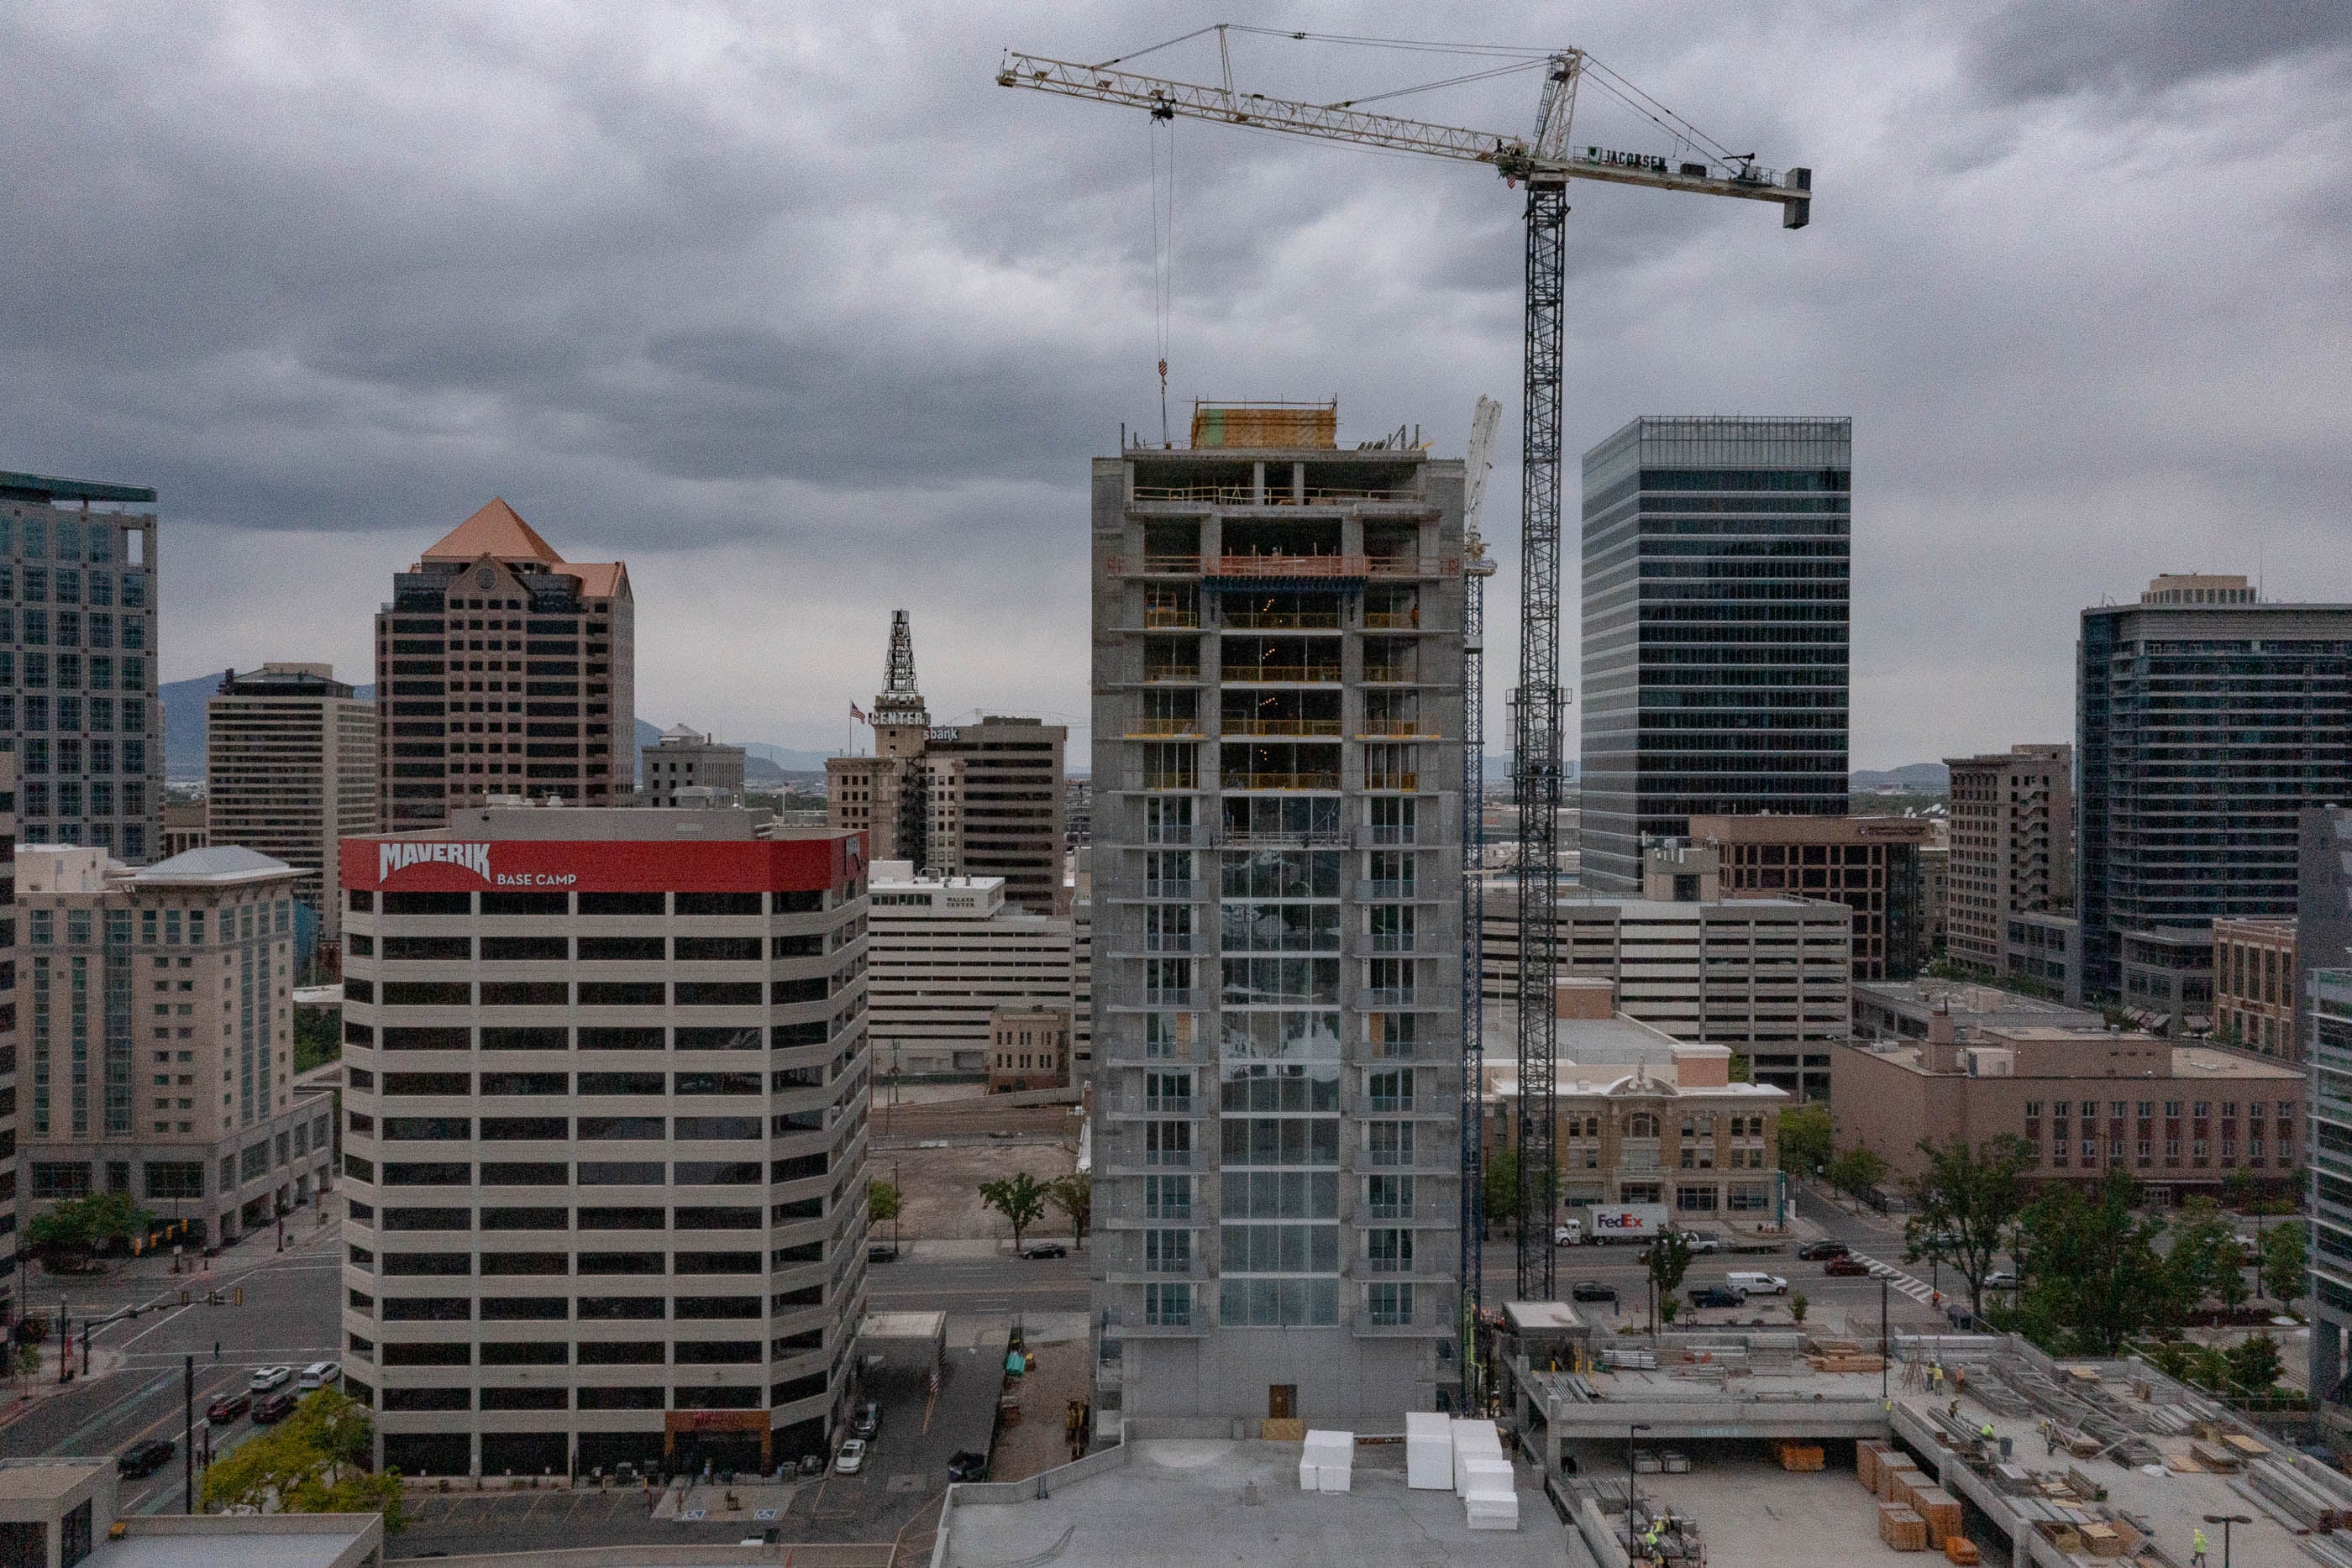 (Francisco Kjolseth | The Salt Lake Tribune) The first modern high-rise apartment community in the heart of downtown Salt Lake City, Liberty Sky Apartments offers 272 residential units featuring studio, 1 and 2 bedroom apartment homes as seen on Tuesday, May 25, 2021. 